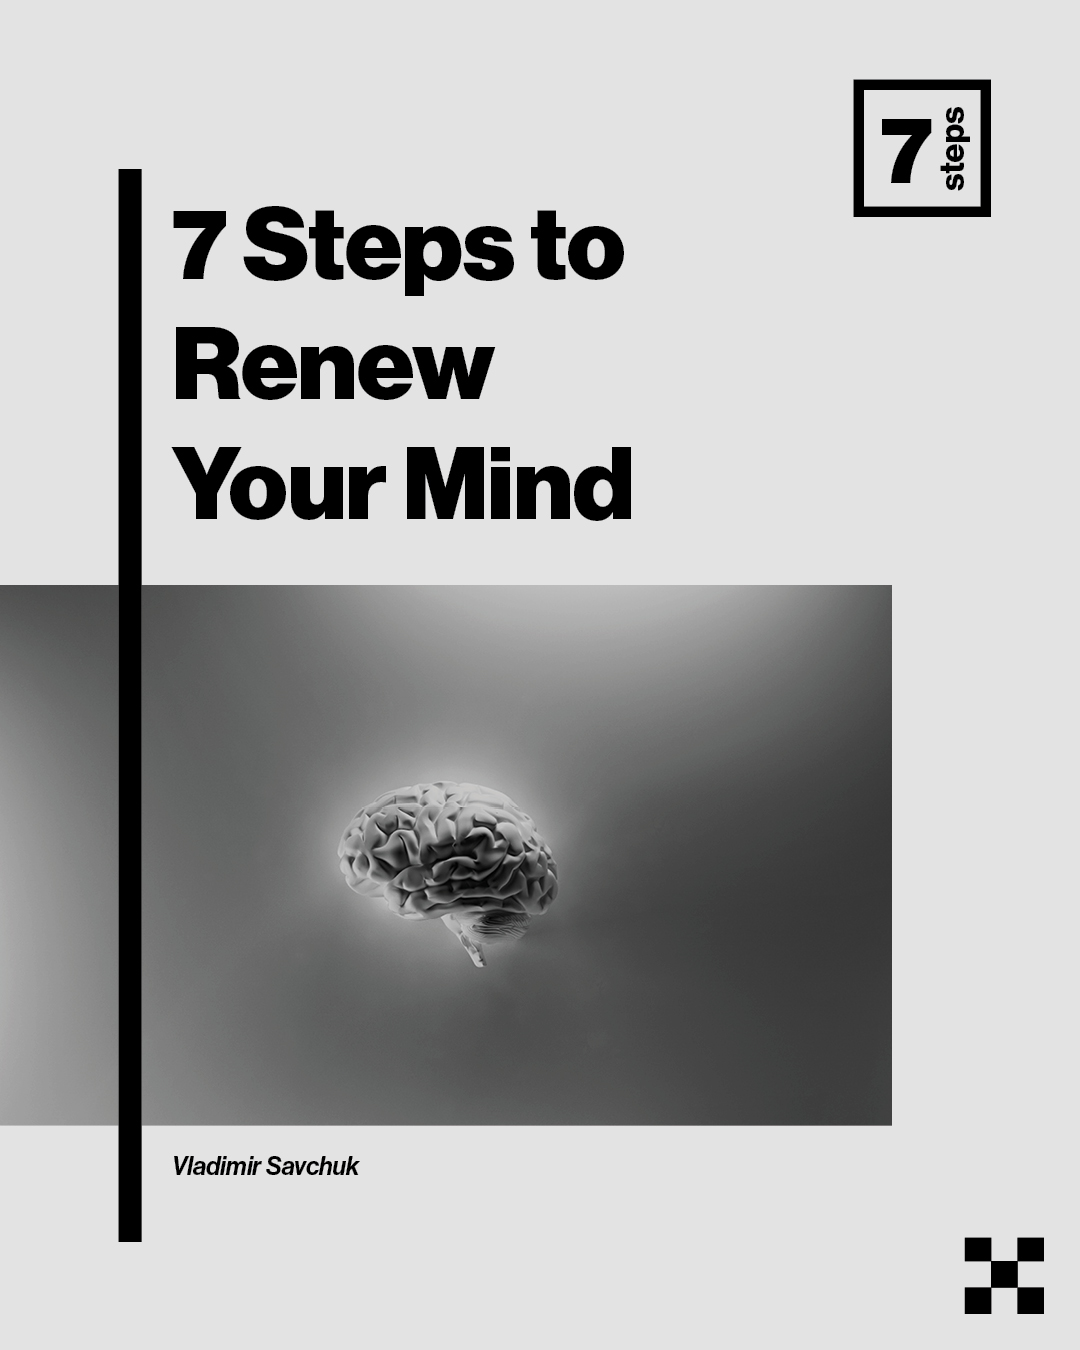 resource - 7 Steps to Renew Your Mind